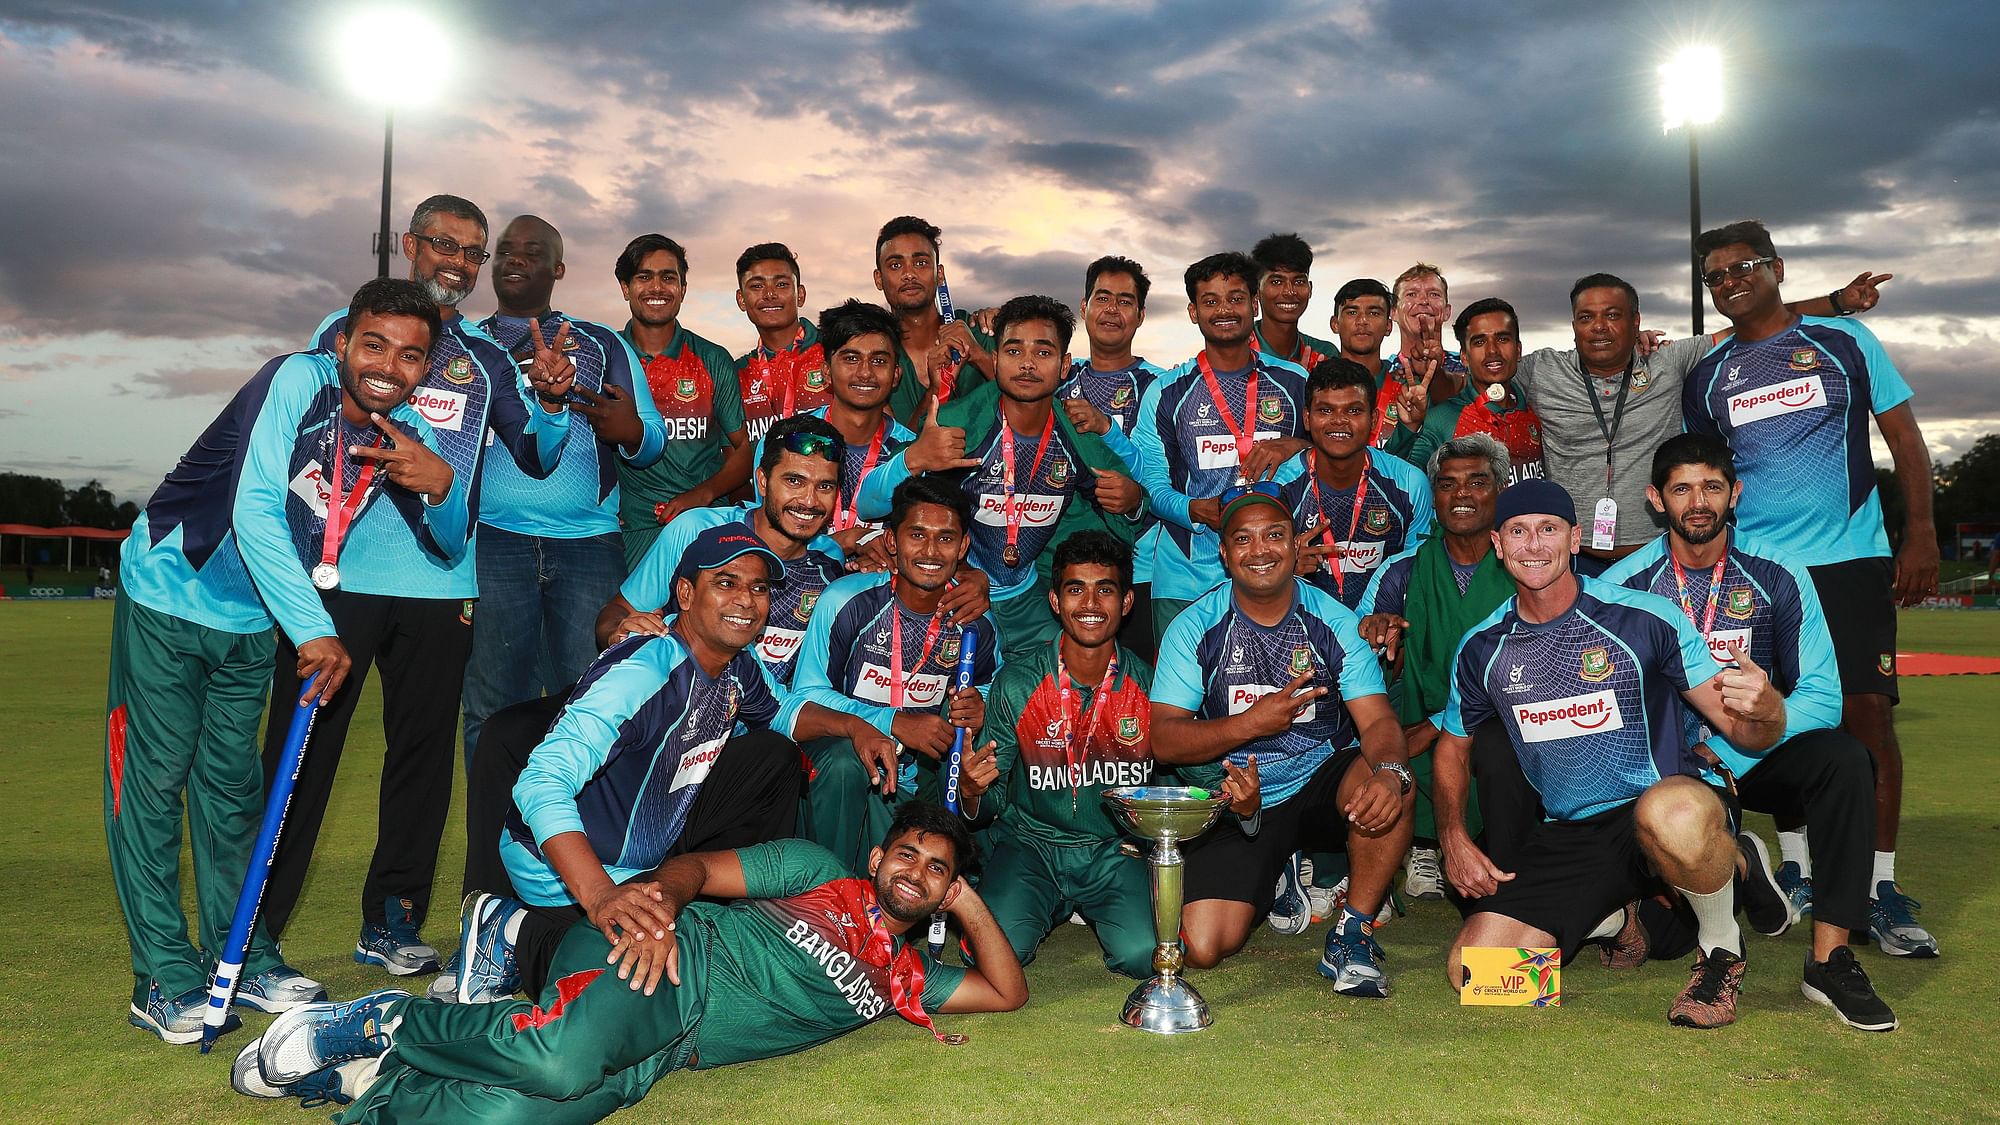 Bangladesh beat India by 3 wickets (DLS method) to lift their maiden ICC U-19 World Cup trophy.